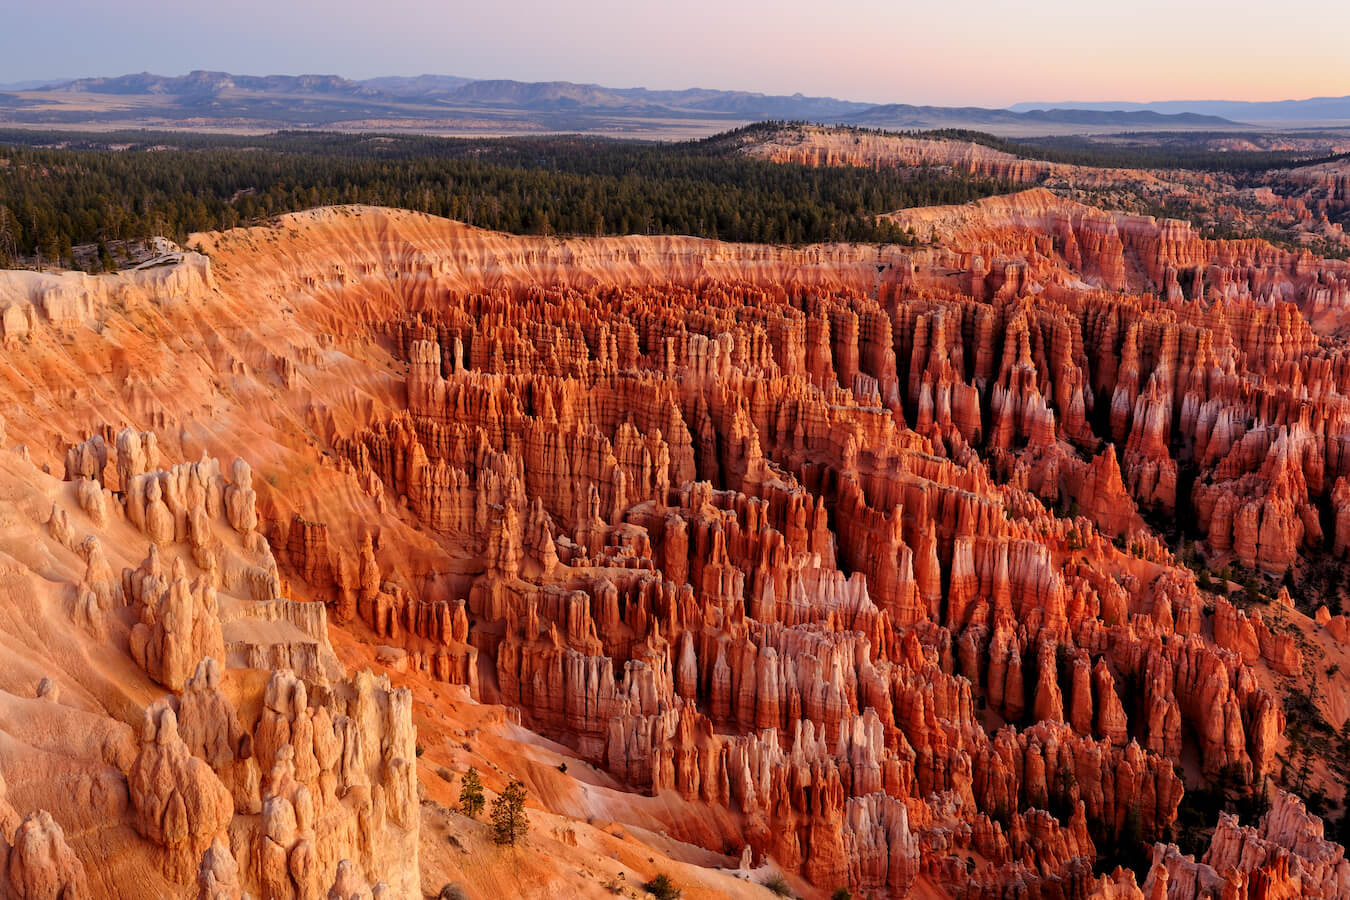 Inspiration Point, Bryce Canyon National Park, Utah | Photo Credit: Shutterstock / Nagel Photography